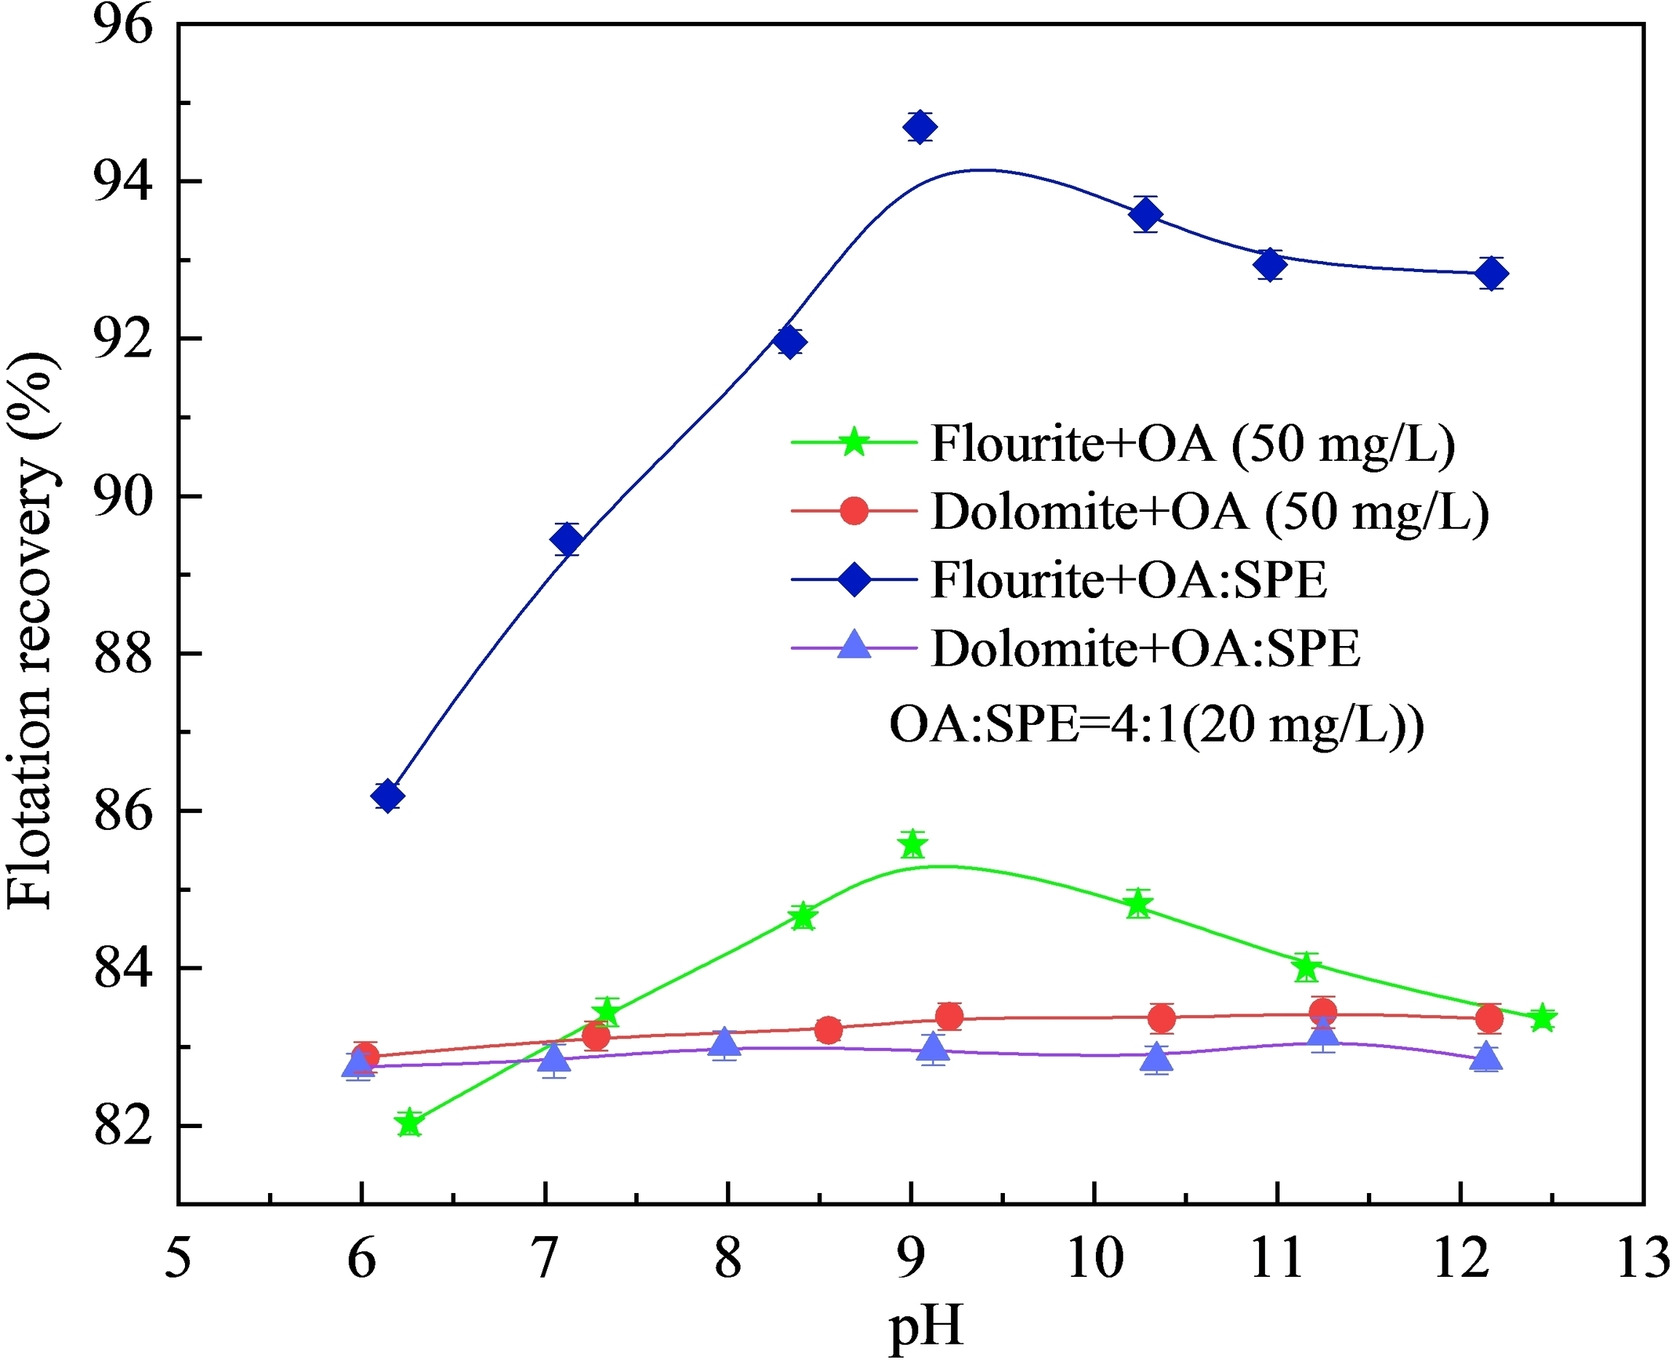 The Effect of Oleic Acid Emulsification using SPE on Fluorite and Dolomite Flotation**